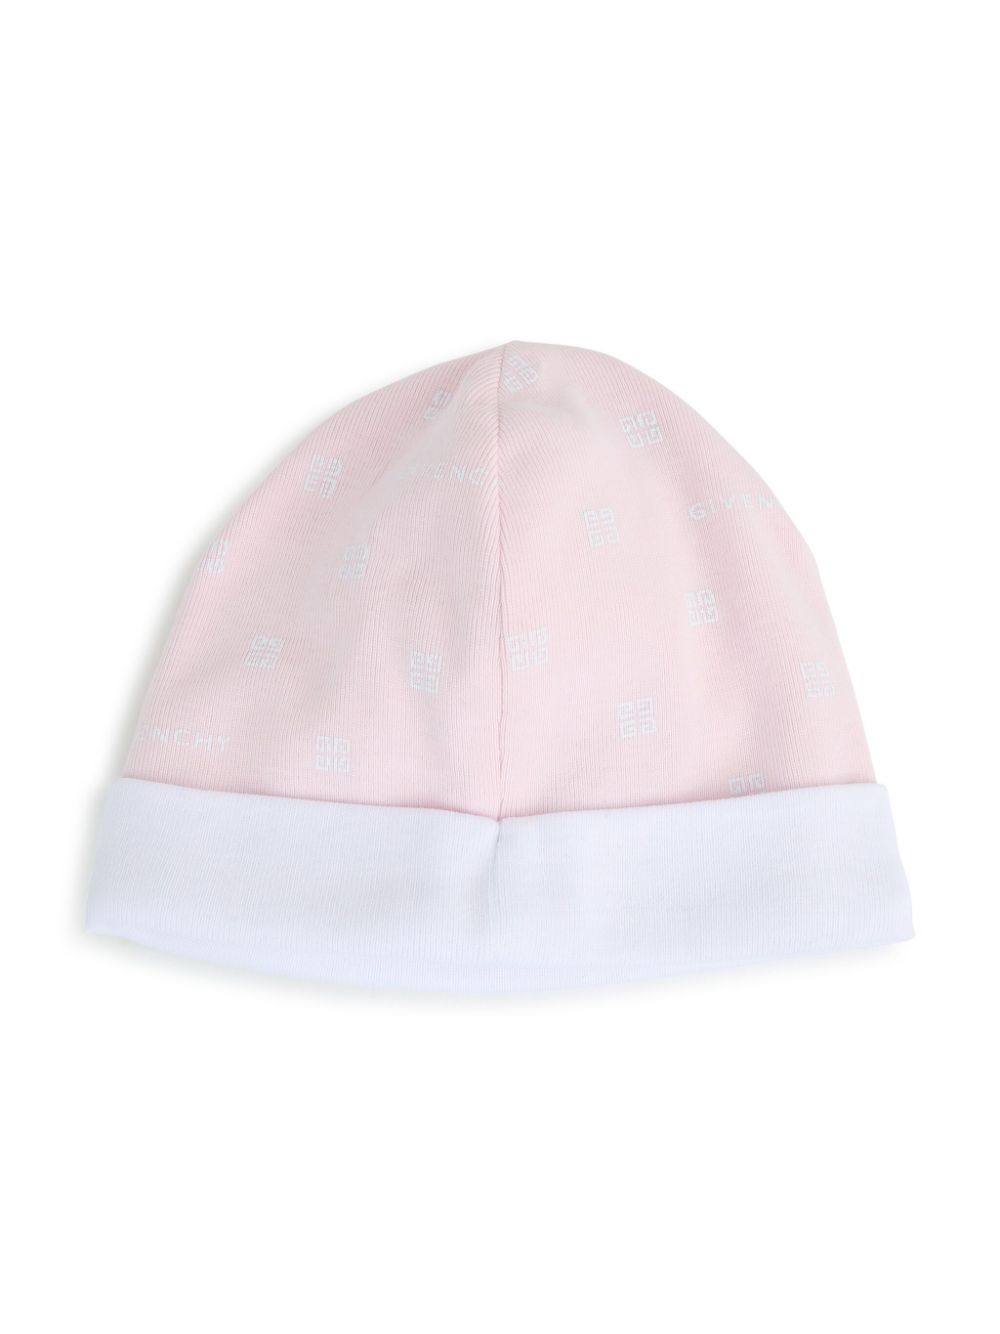 Pink and white hat for baby girls with logo